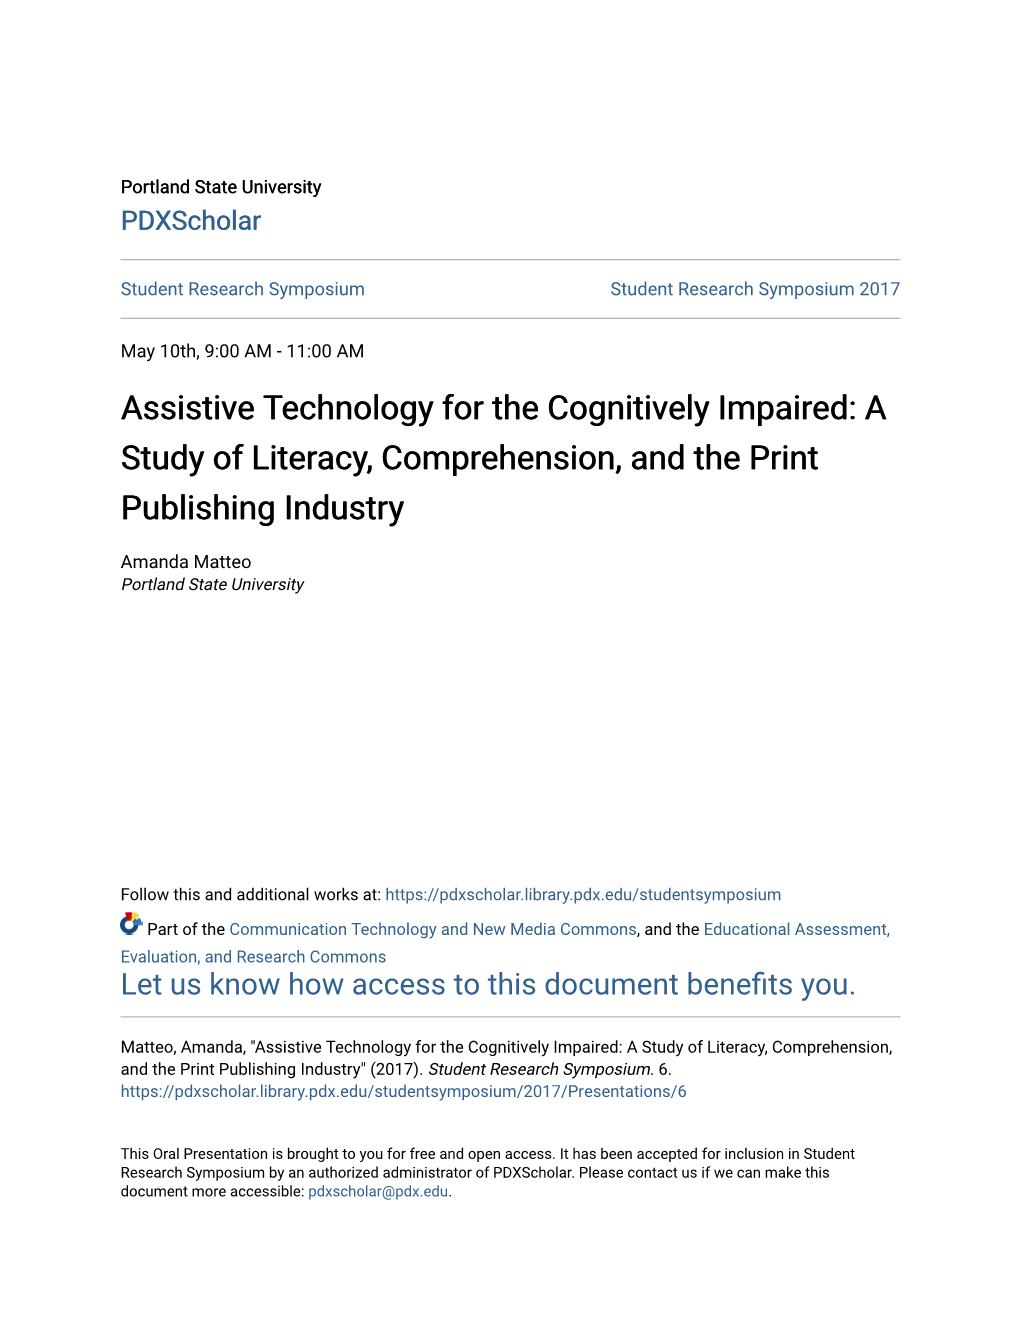 Assistive Technology for the Cognitively Impaired: a Study of Literacy, Comprehension, and the Print Publishing Industry